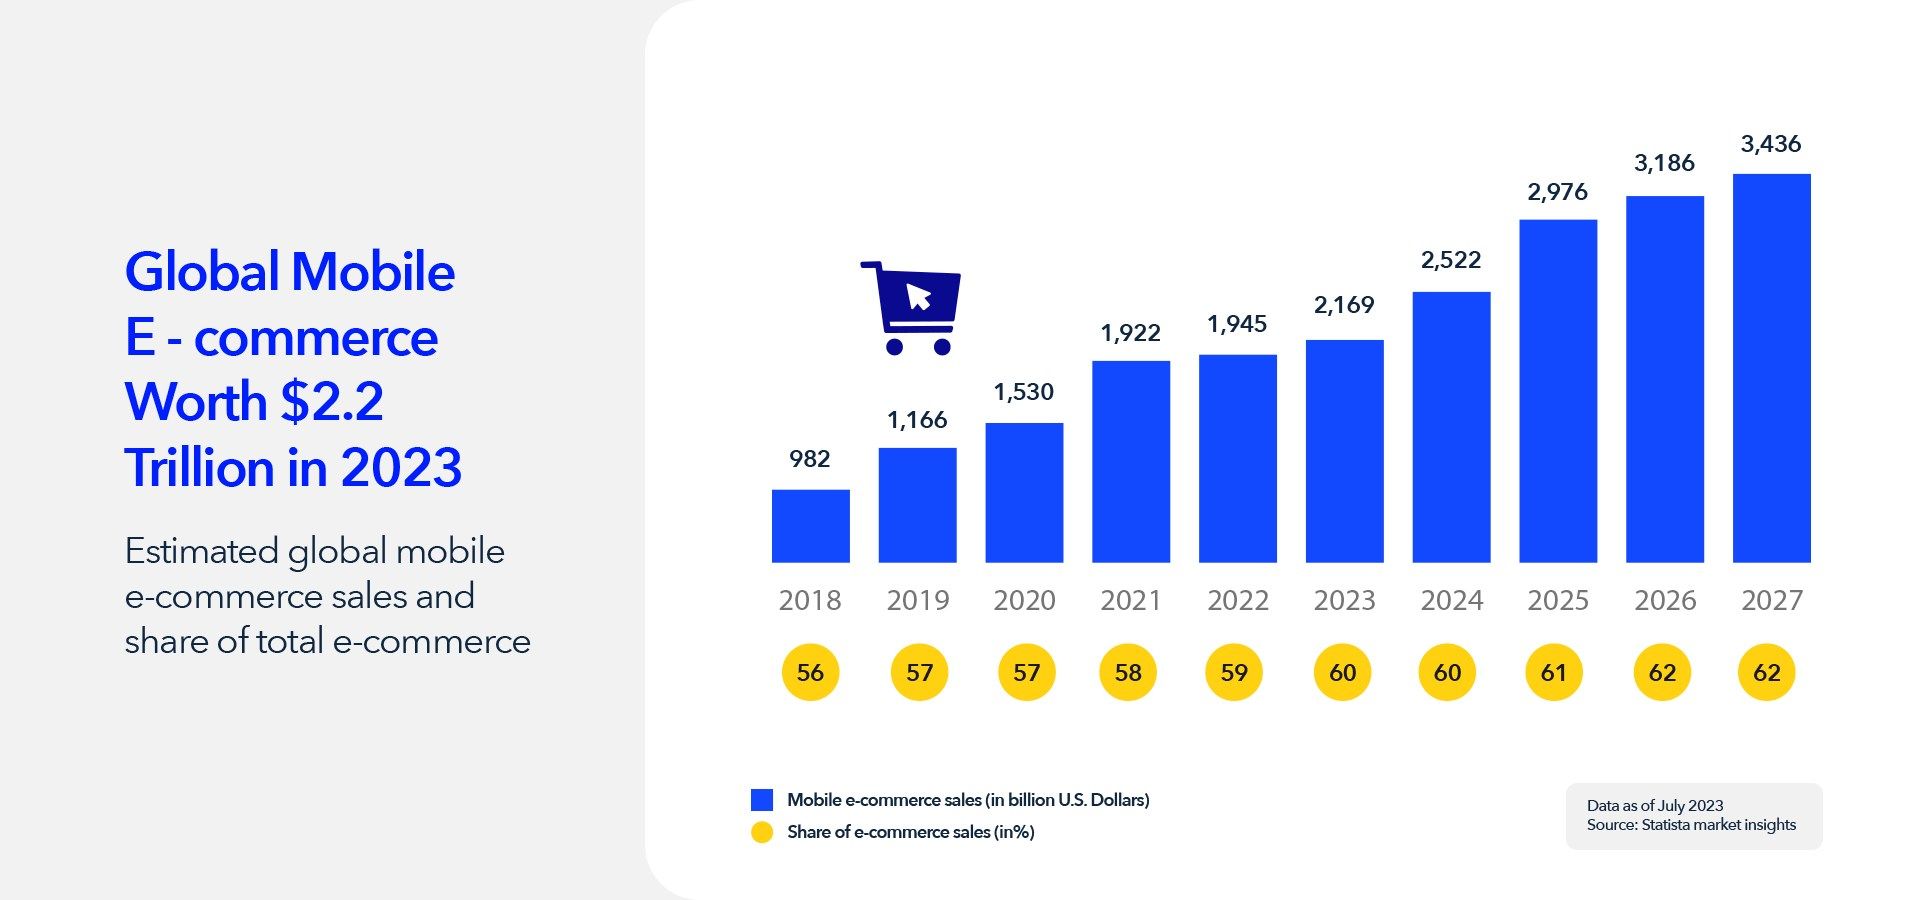 Comparative chart showing the growth of global mobile e-commerce worth from 2018 to 2027.